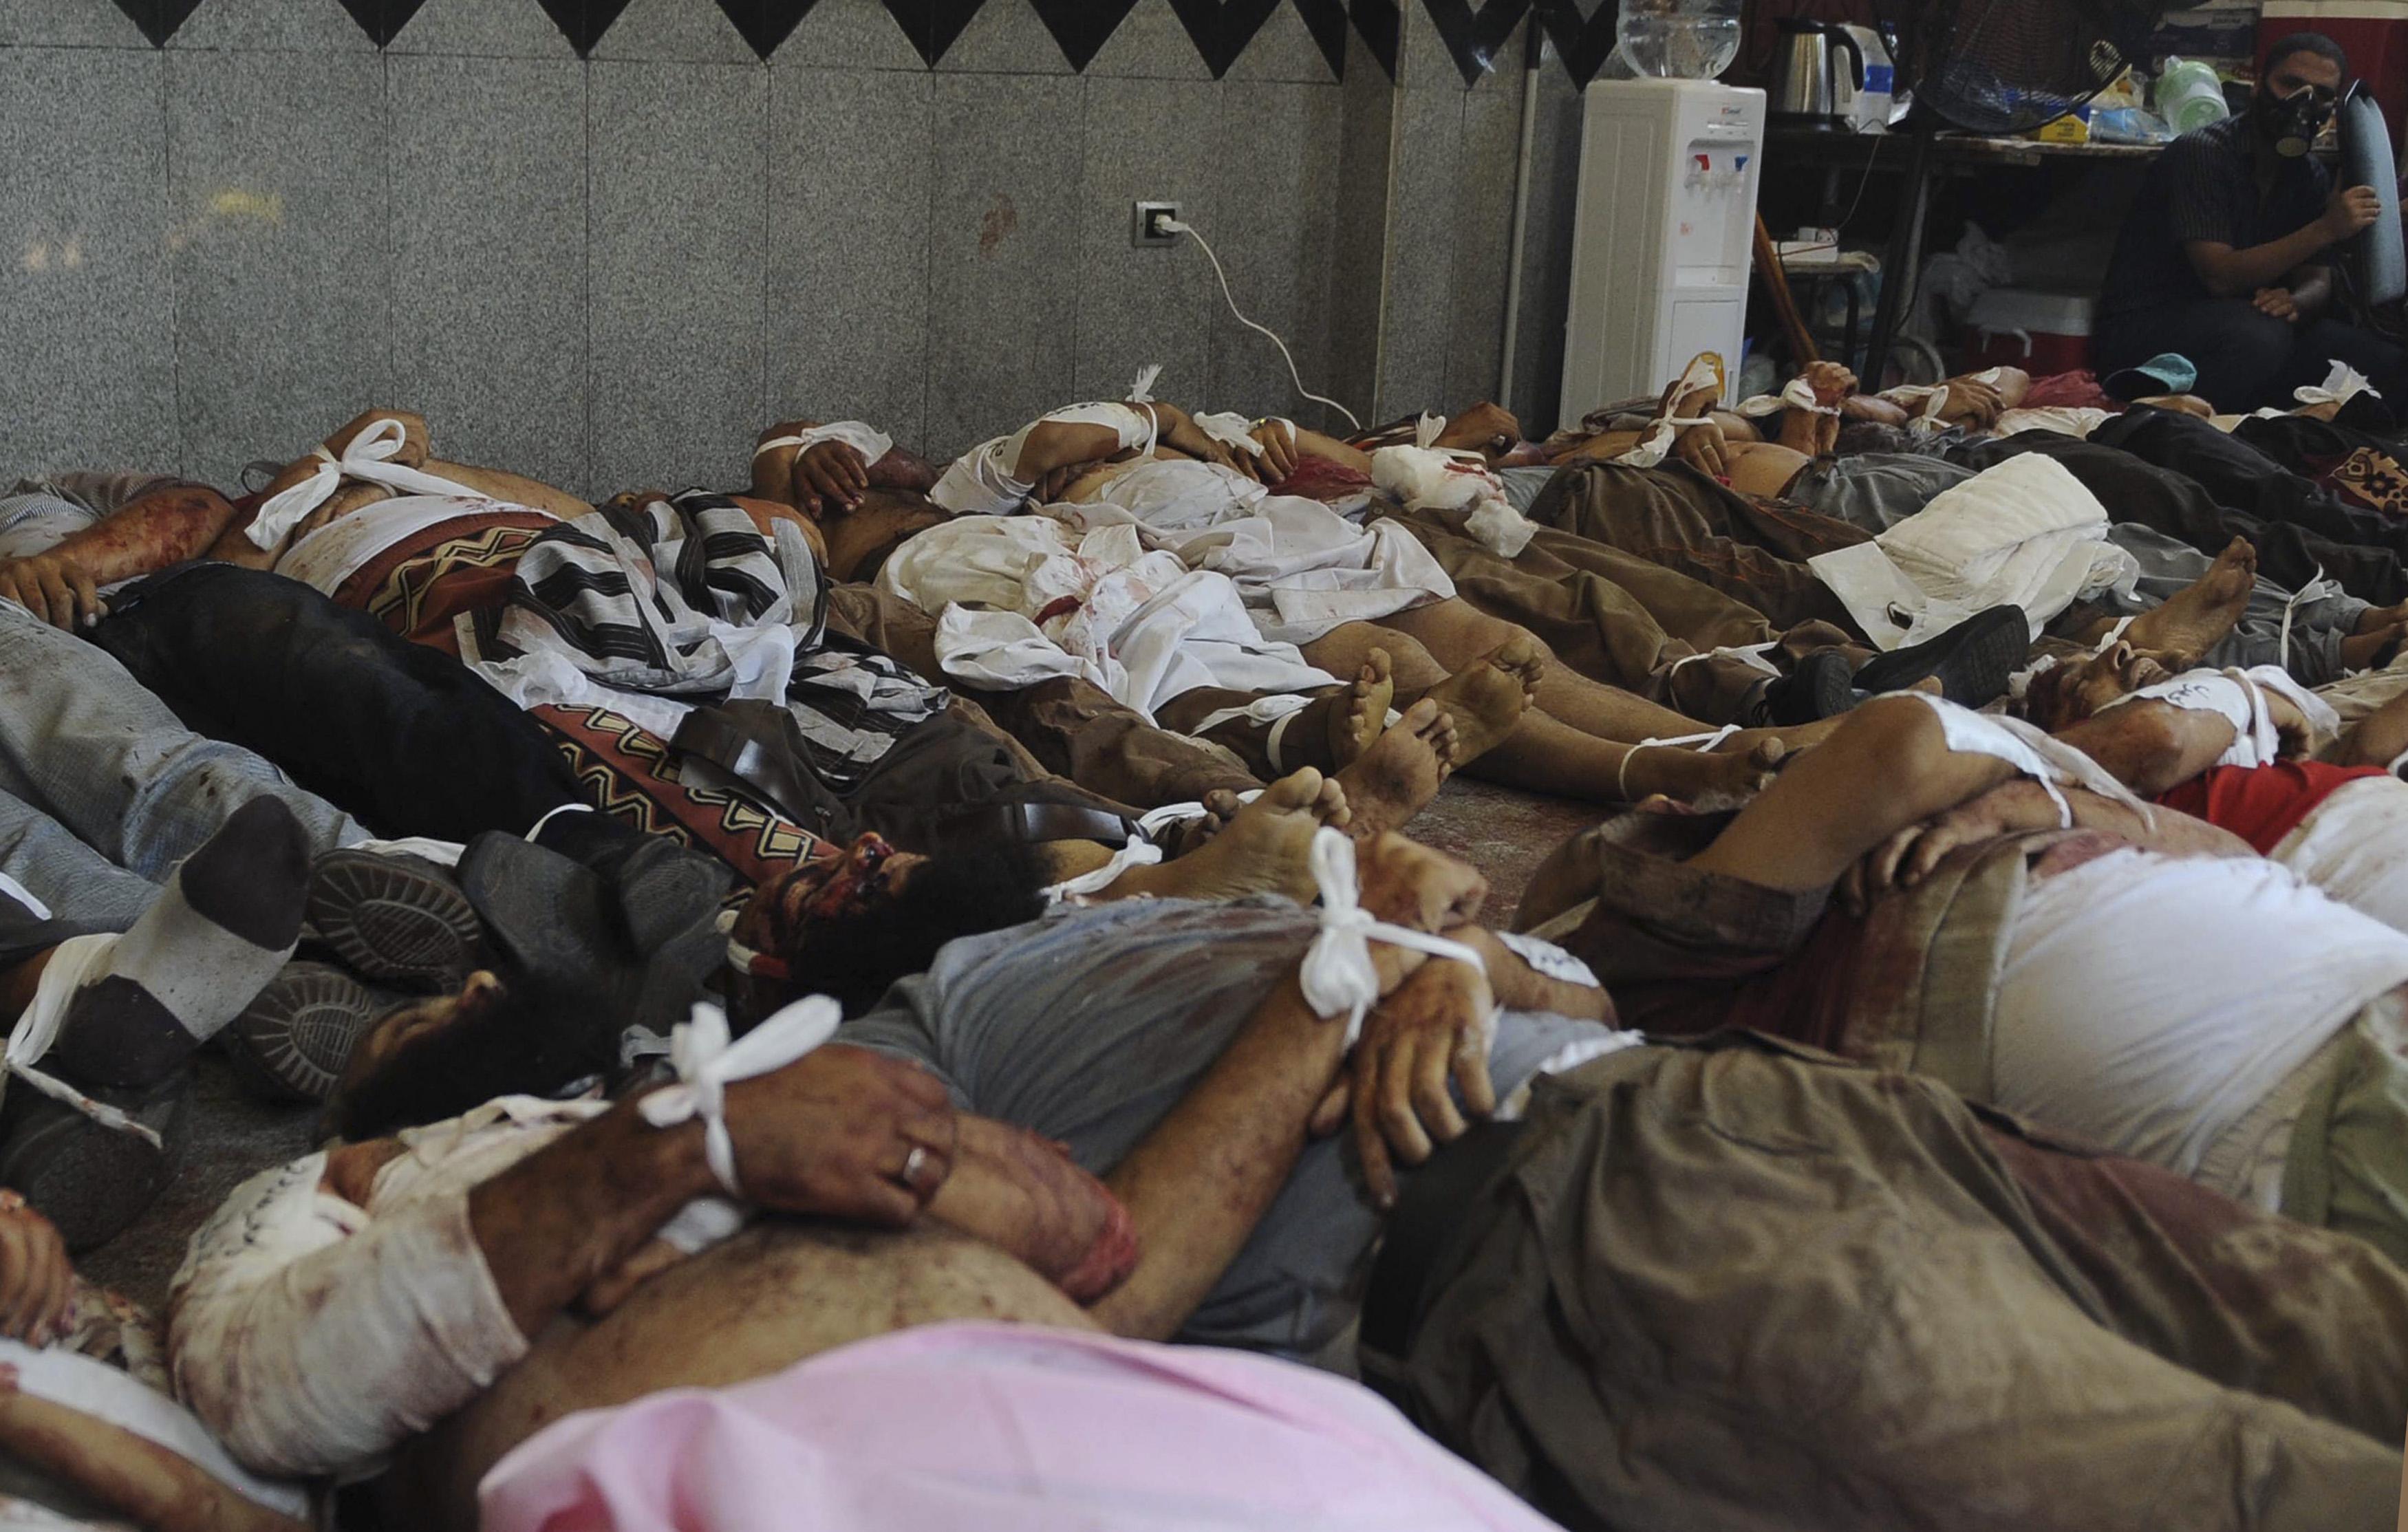 More than 250 bodies at Cairo mosque - report